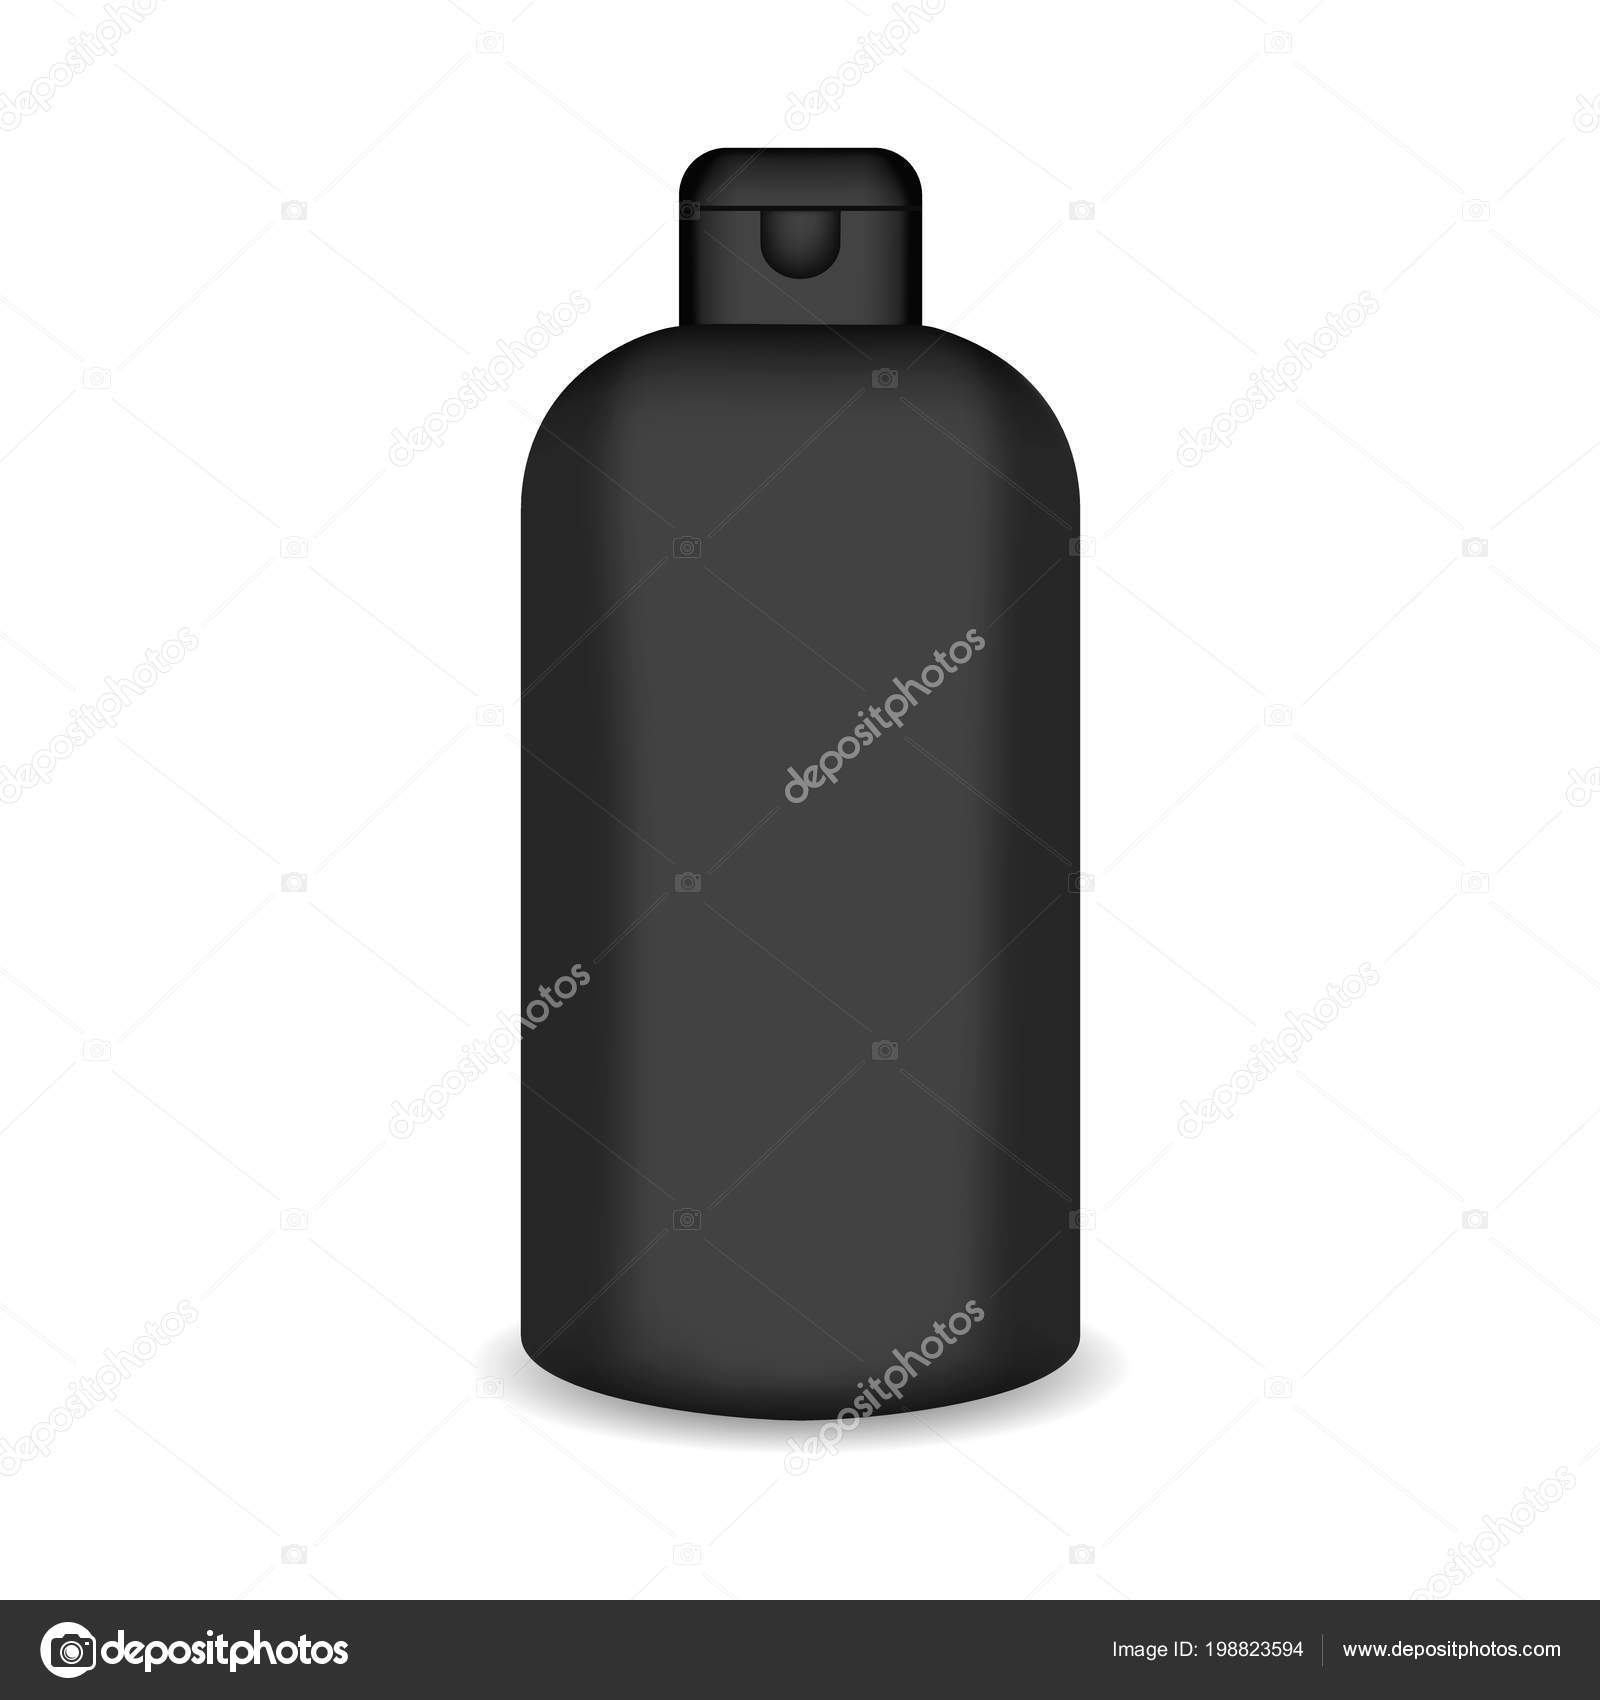 Download White Glossy Plastic Bottle For Shampoo Shower Gel Lotion Body Milk Bath Foam Realistic Packaging Mockup Template Front View Vector Illustration Vector Image By C Stalkerstudent Vector Stock 198823594